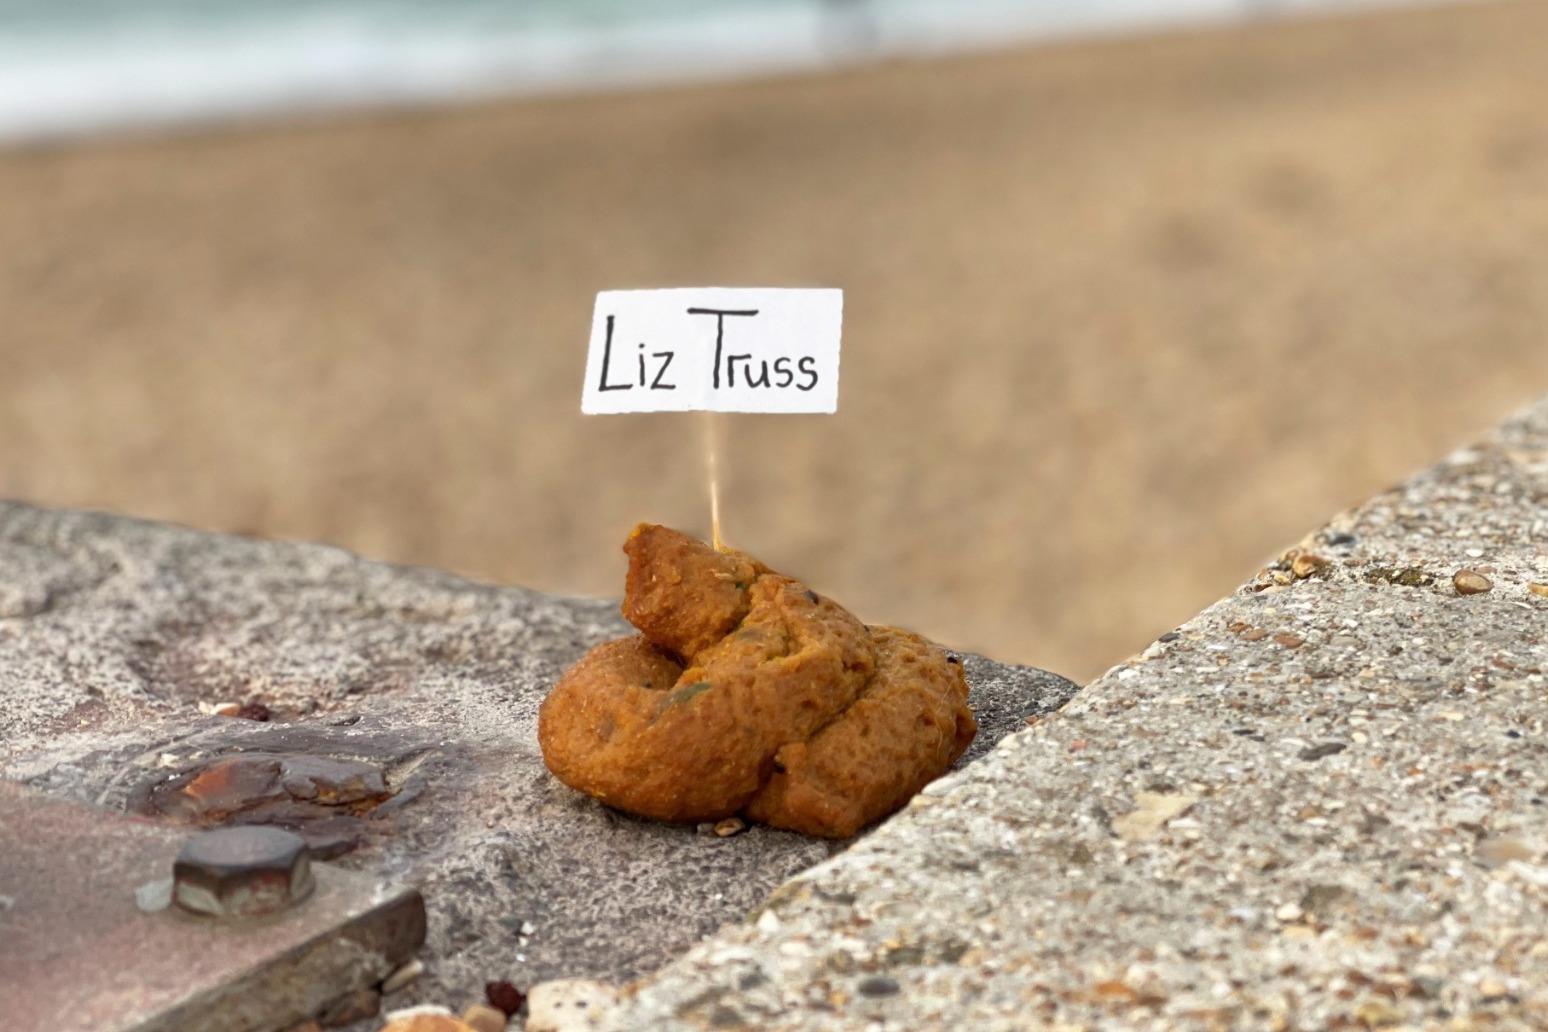 Protest pong: Street artist’s mucky campaign against Liz Truss is fake poos 